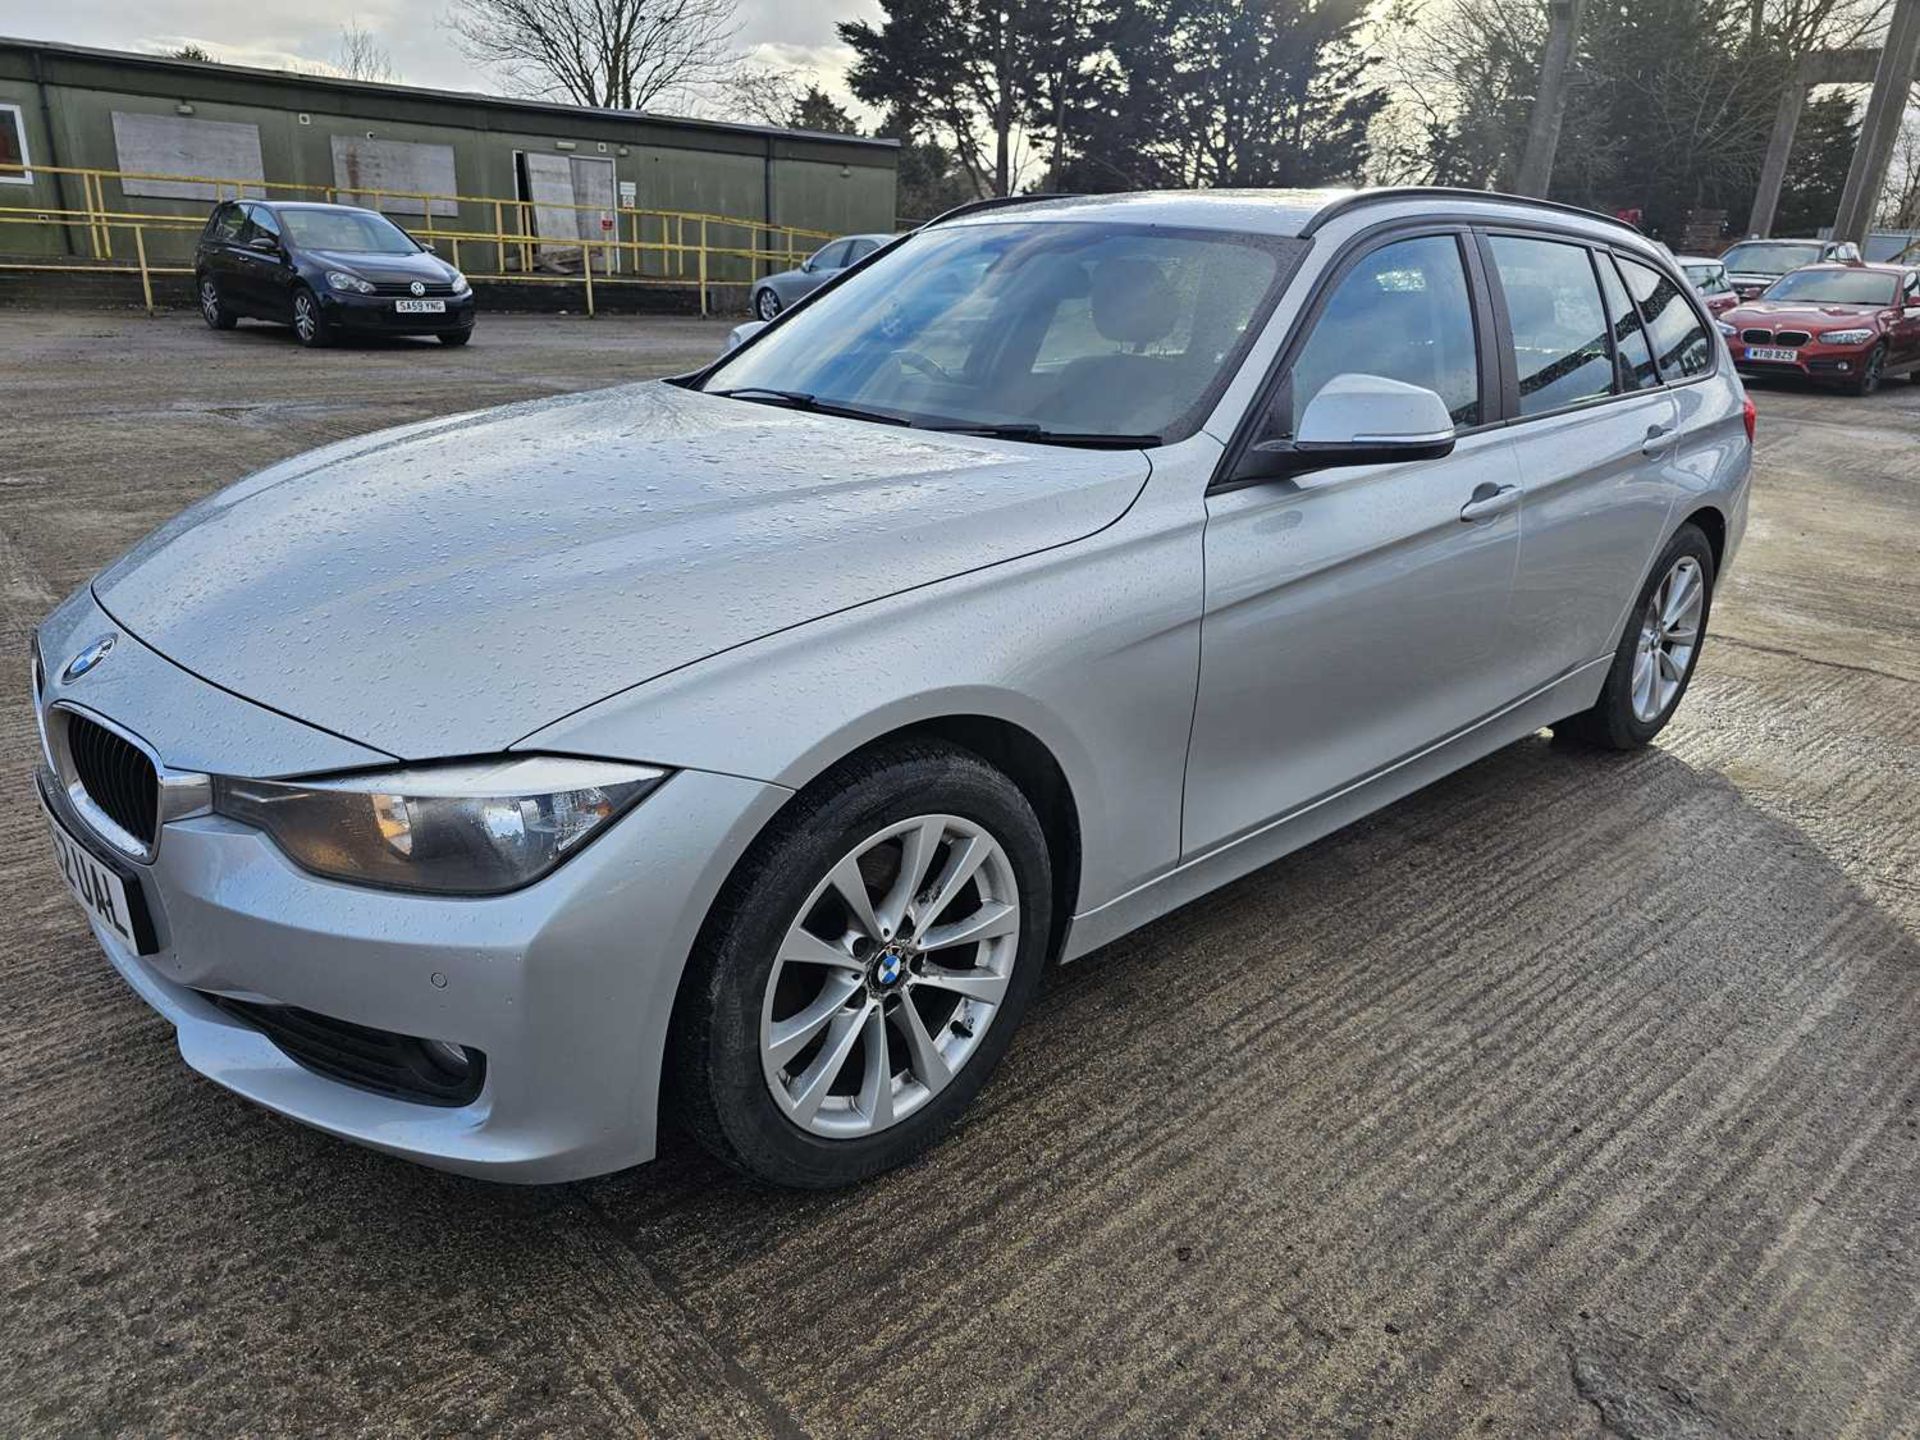 2013 BMW 320D Estate, Auto, Parking Sensors, Full Leather, Heated Seats, Bluetooth, Cruise Control, 